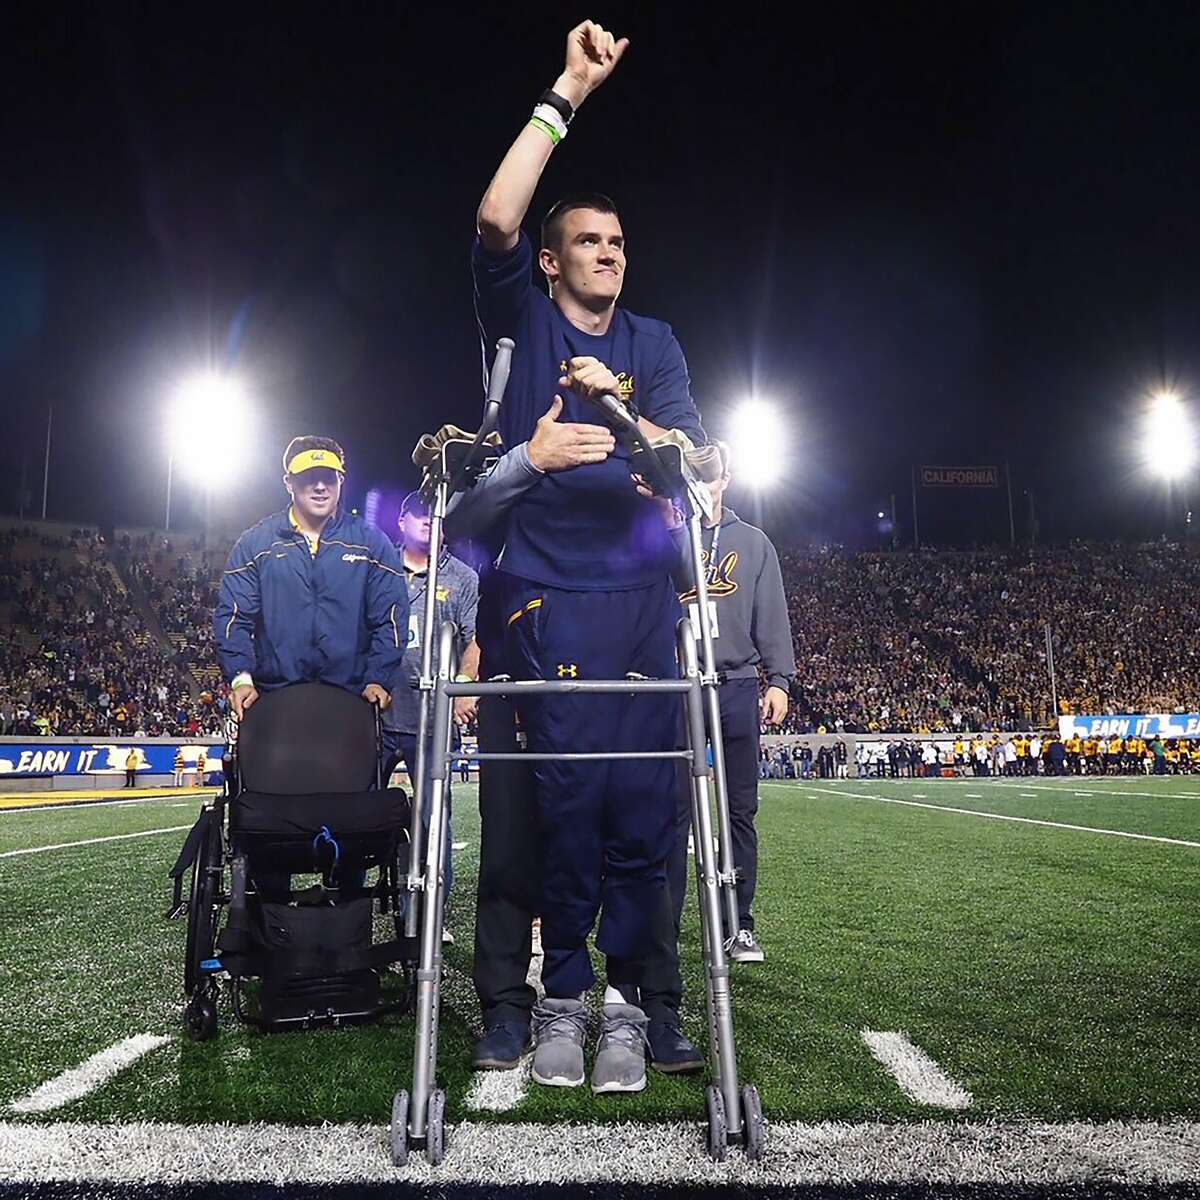 Robert Paylor is honored during a ceremony at a Cal home football game on September 29, 2018 at California Memorial Stadium.